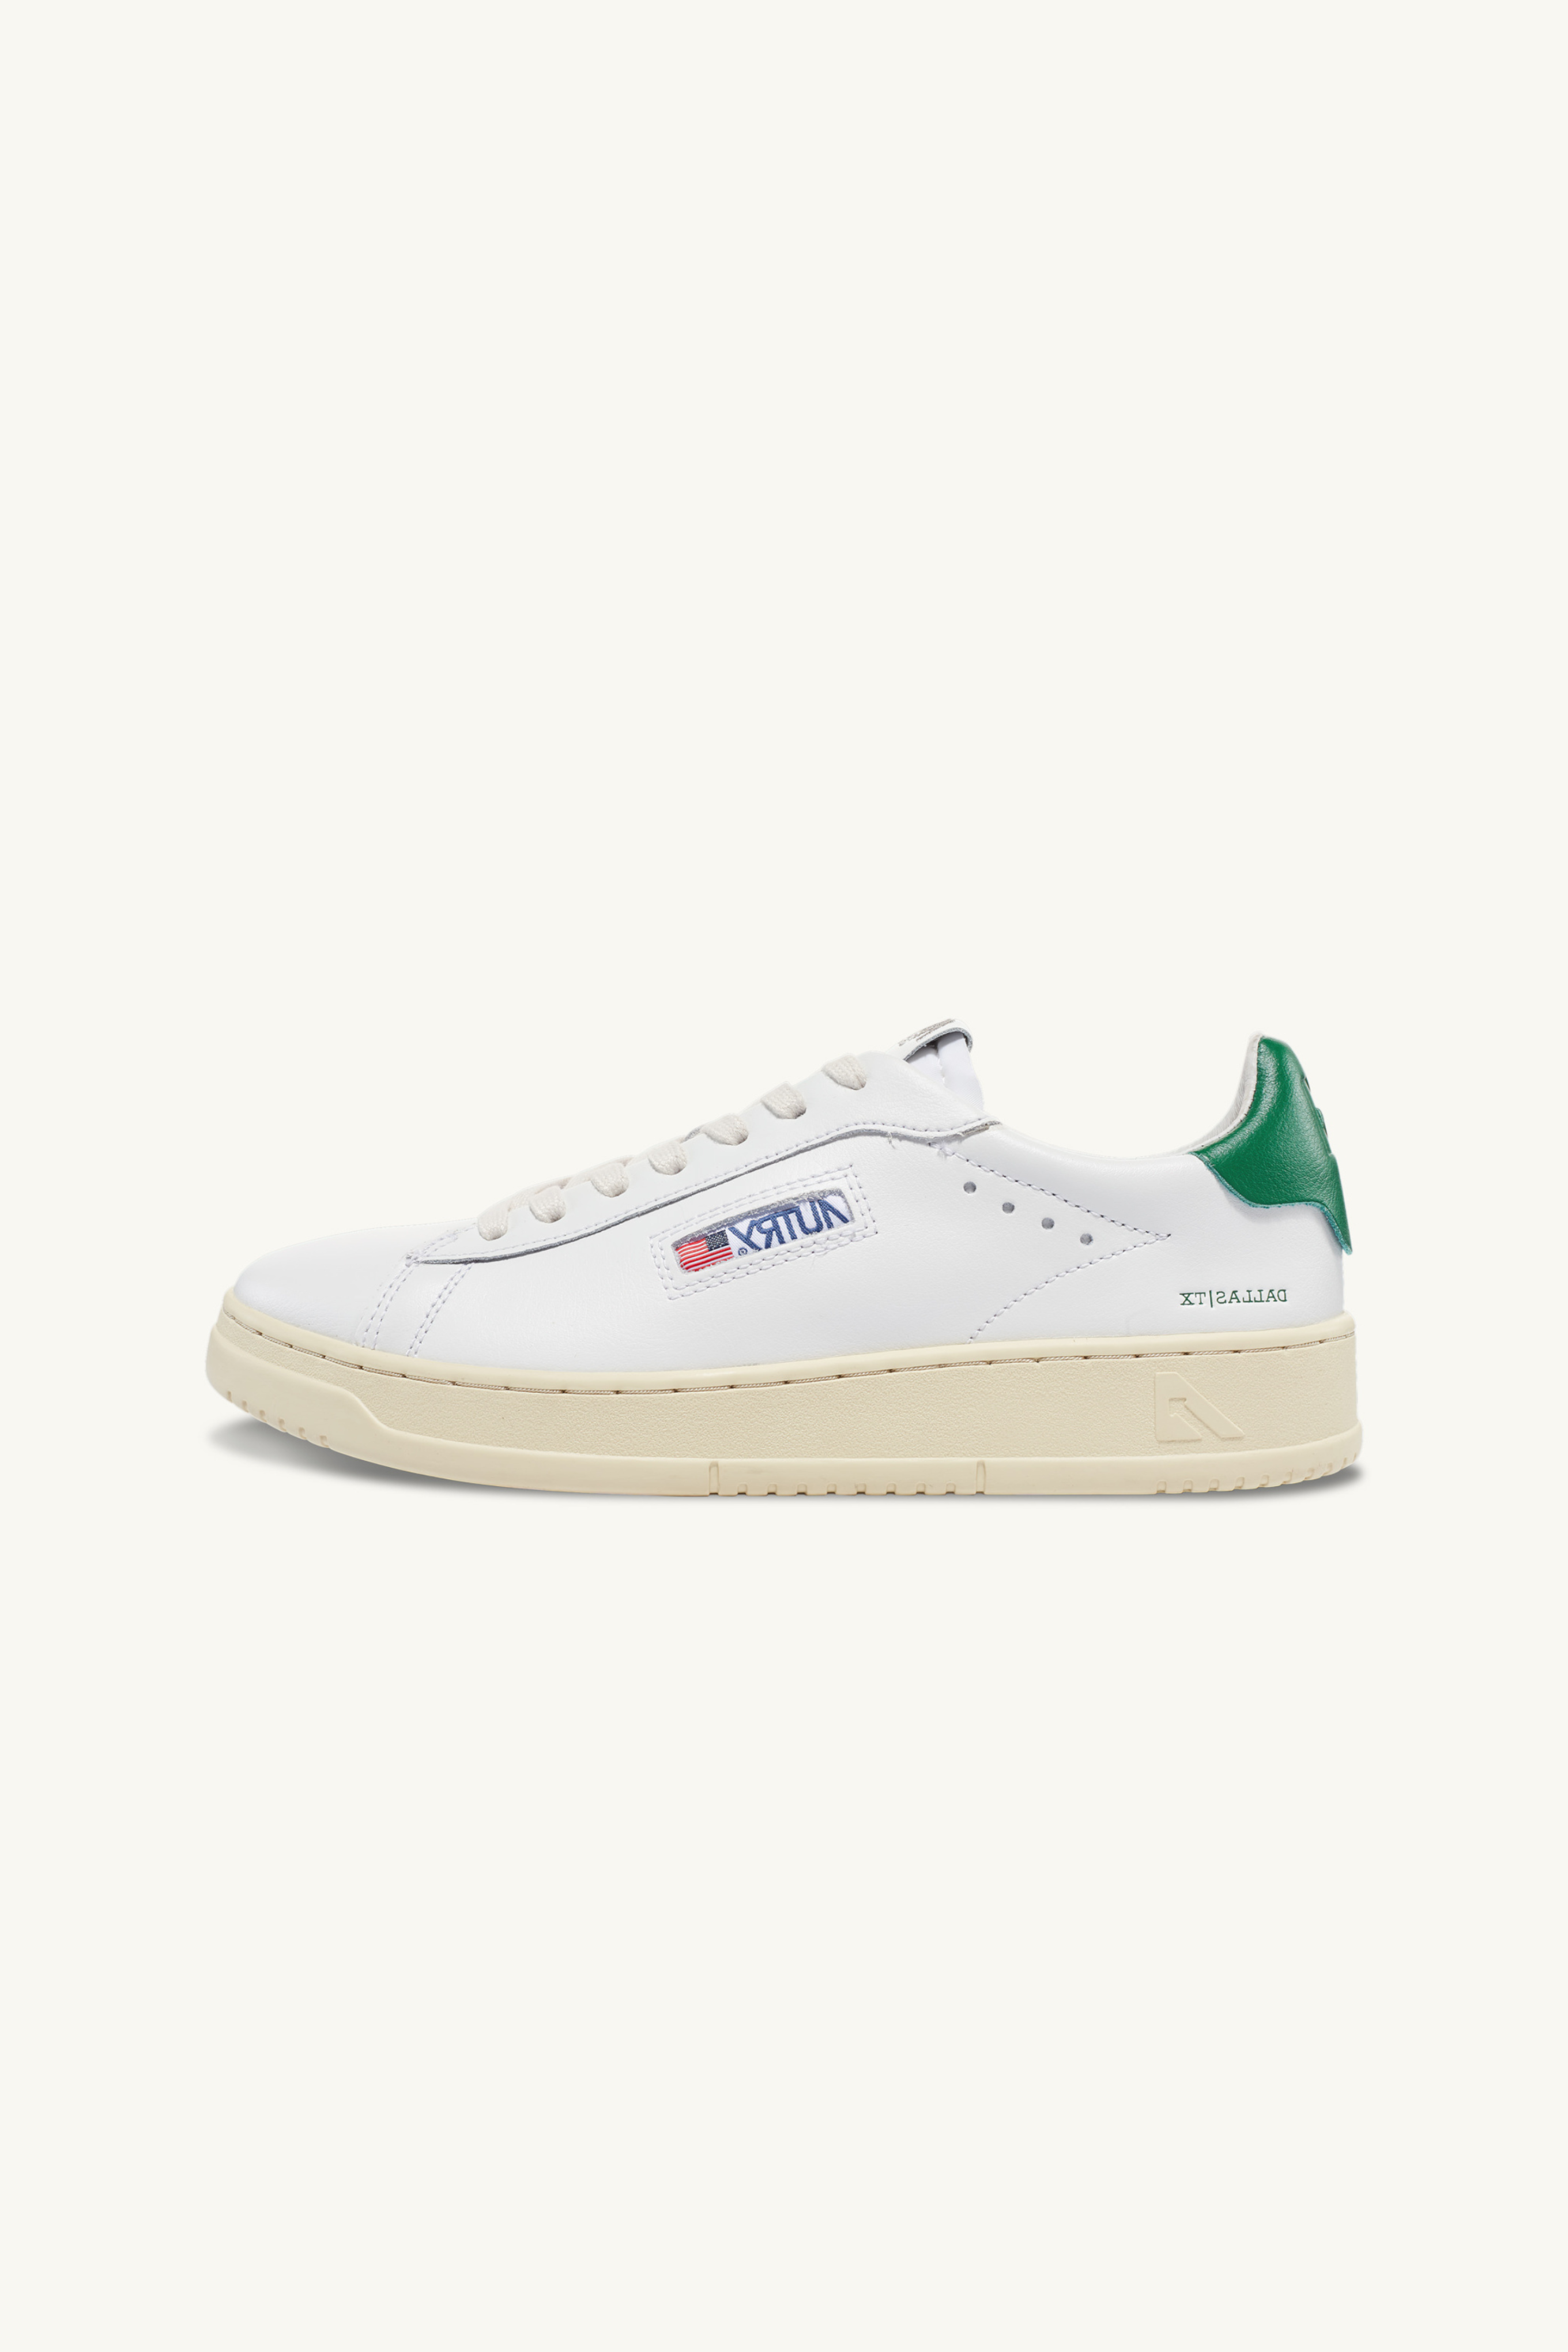 ADLM-NW02 - DALLAS LOW SNEAKERS IN LEATHER COLOR WHITE AND GREEN